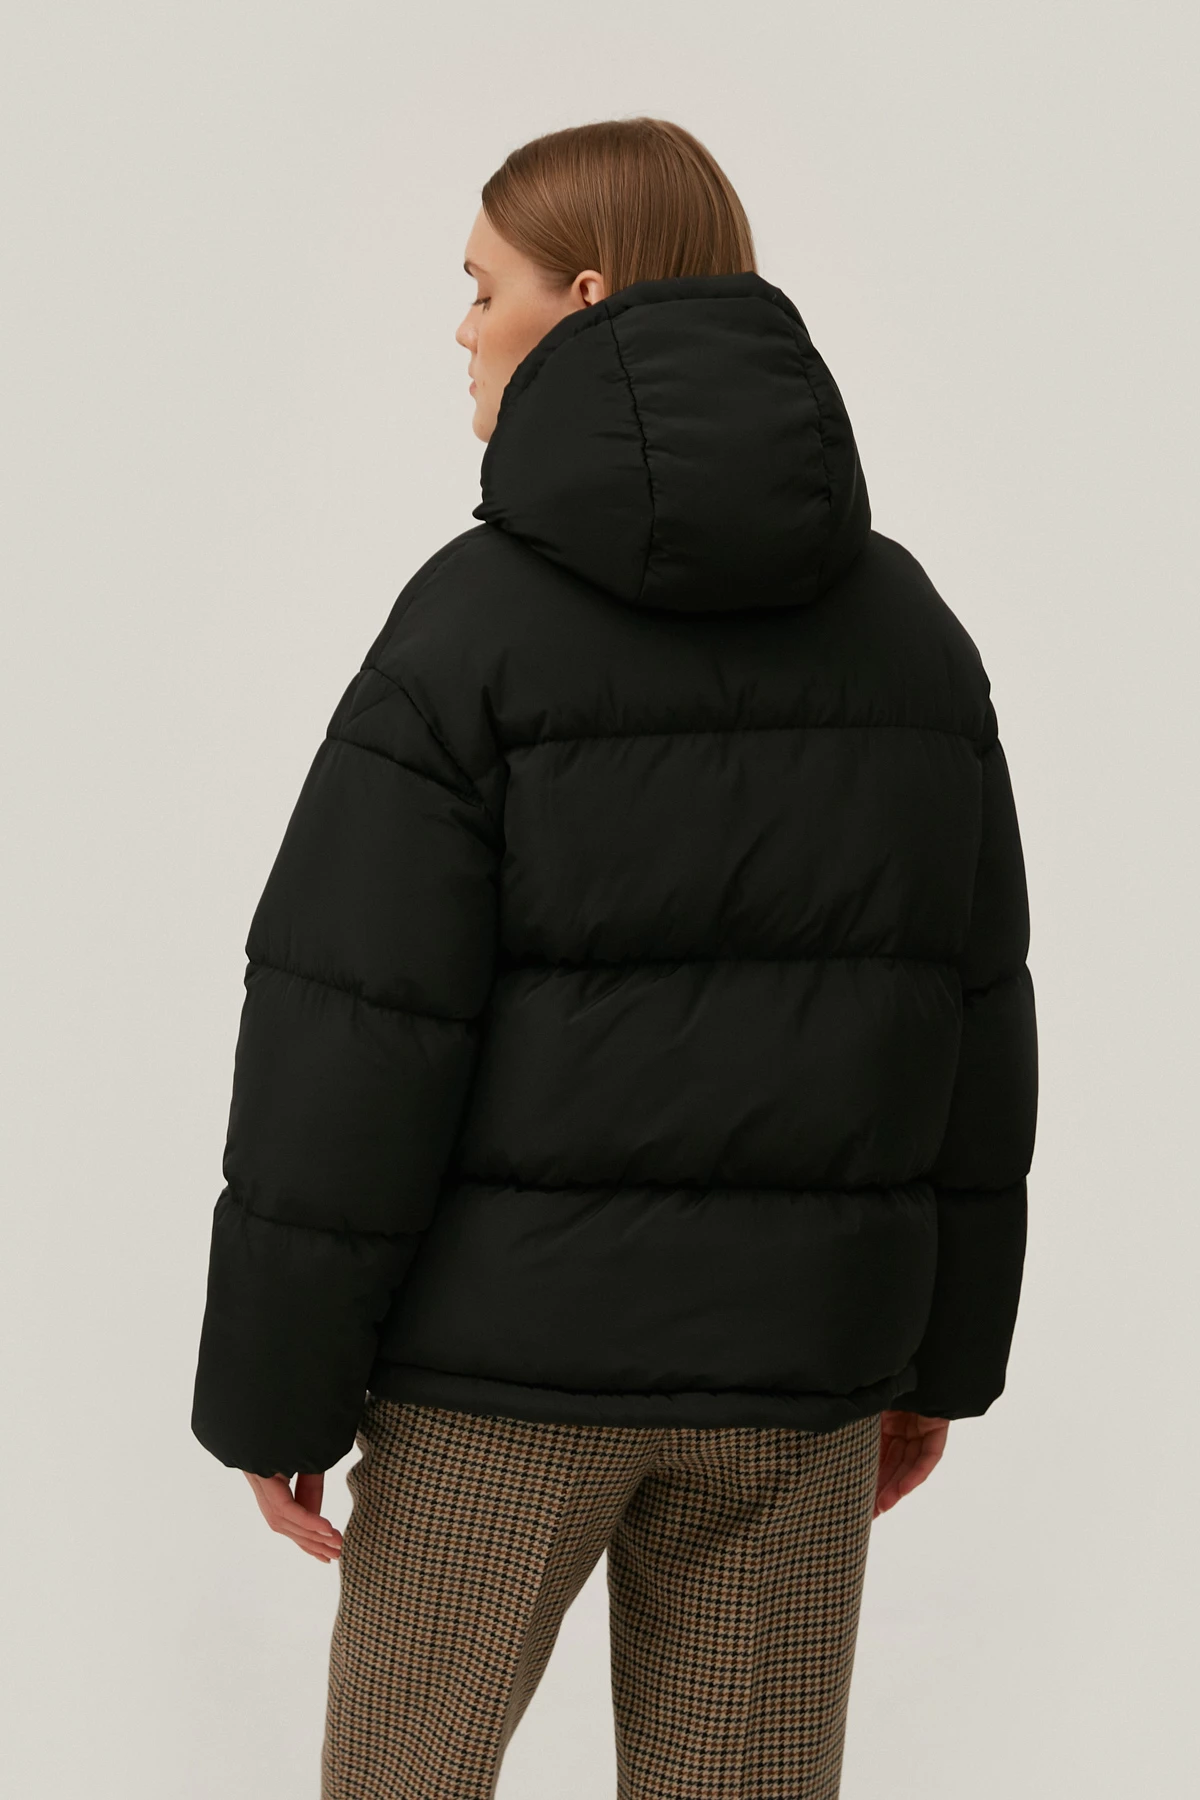 Black quilted jacket with eco-down insulation, photo 5